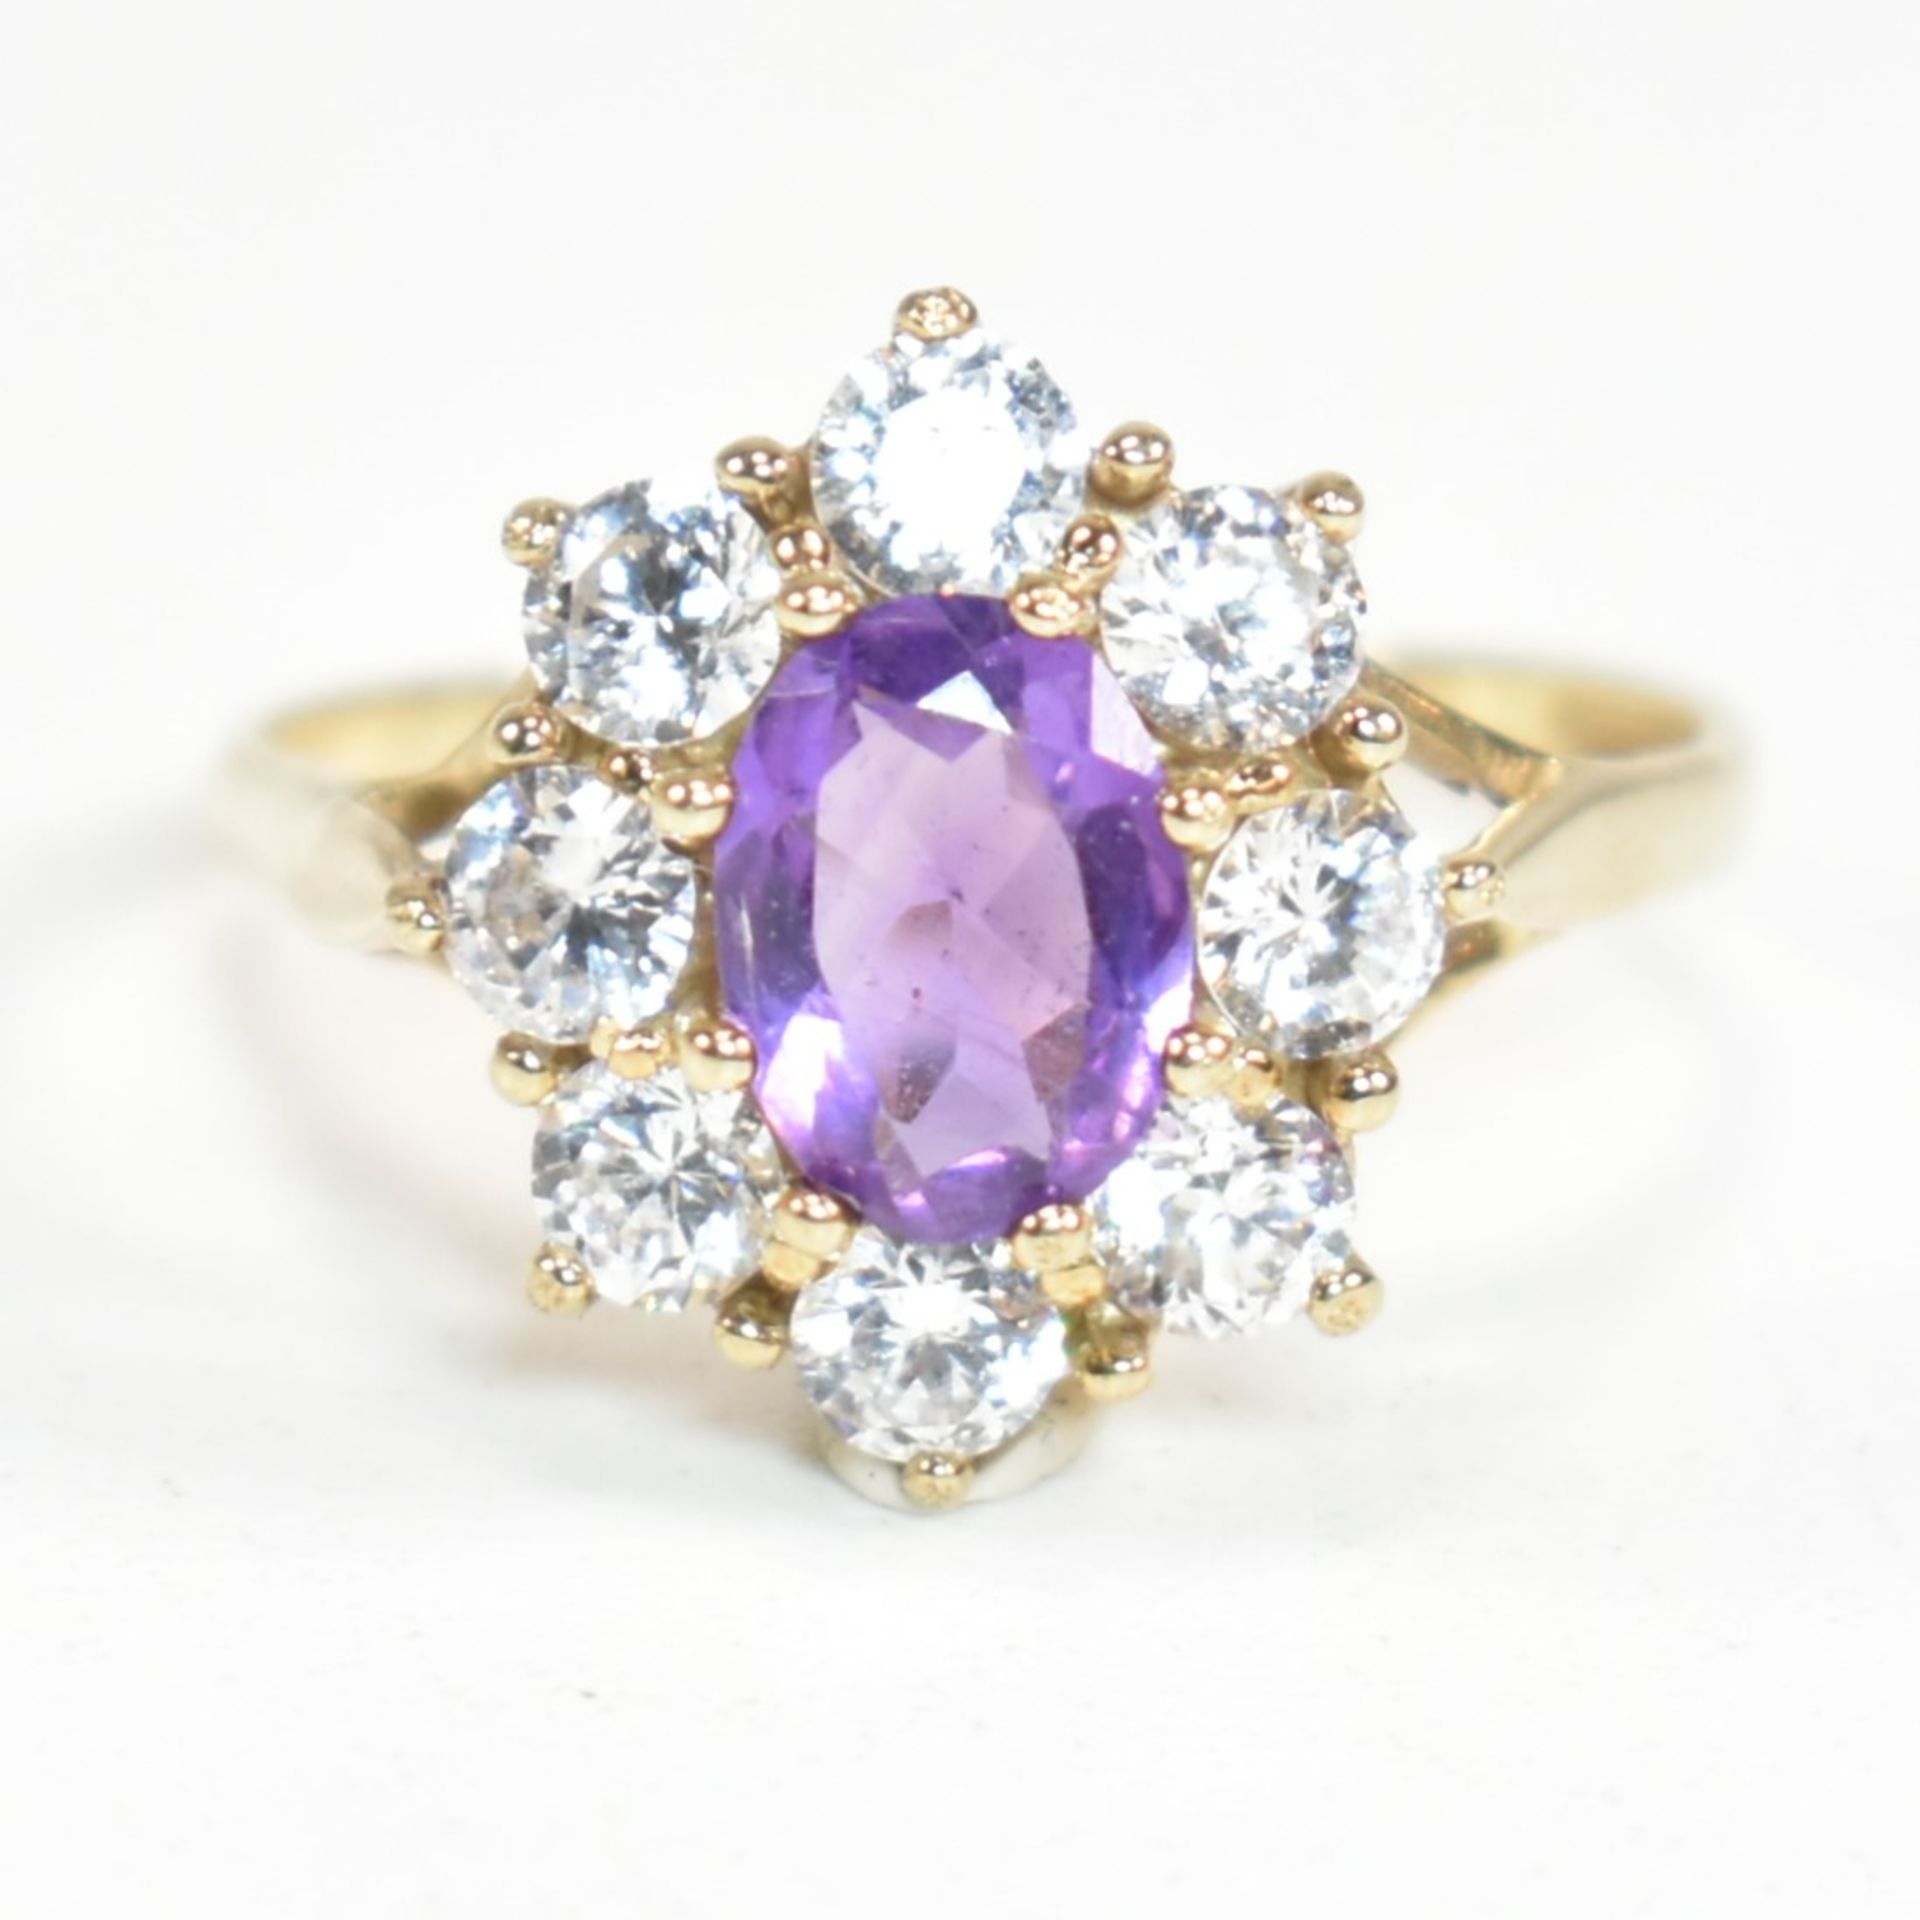 HALLMARKED 9CT GOLD AMETHYST & WHITE STONE CLUSTER RING